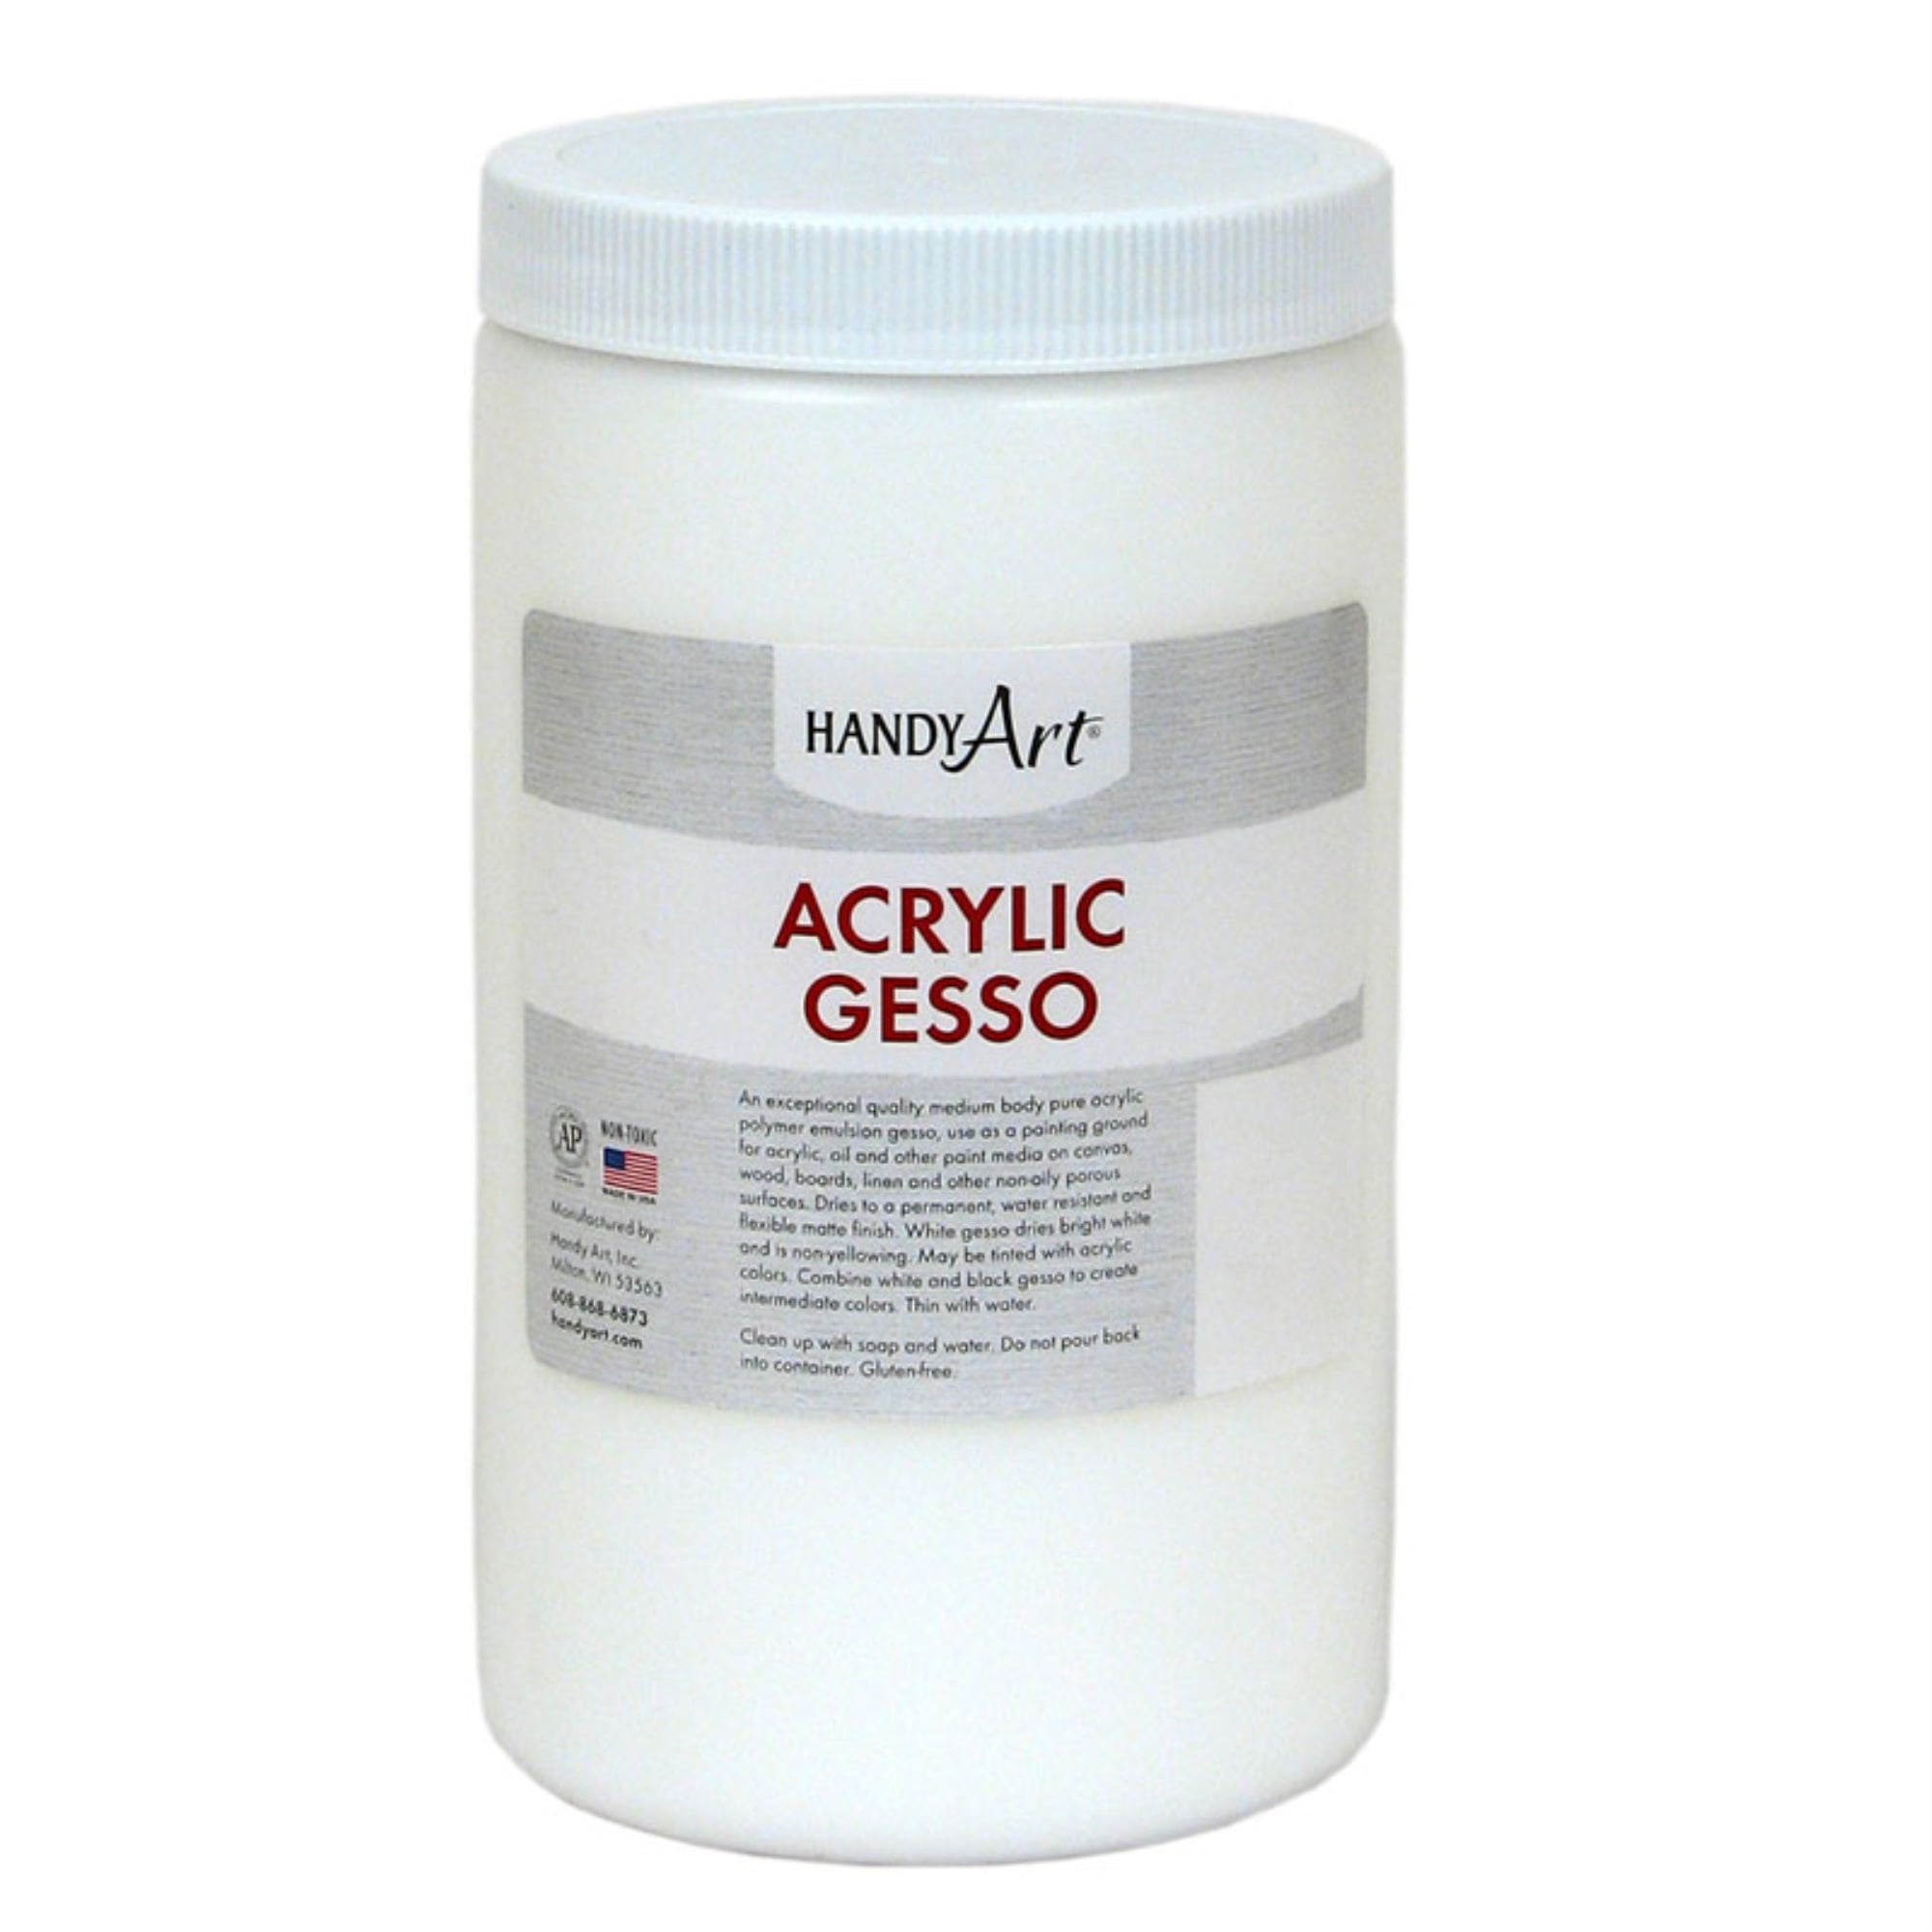 Hyatt's Professional Acrylic Gesso – 1 Gallon / 128 Oz, Made in USA,  Maximum Pigment and Opacity Load, Conforms to ASTM-D 4236 